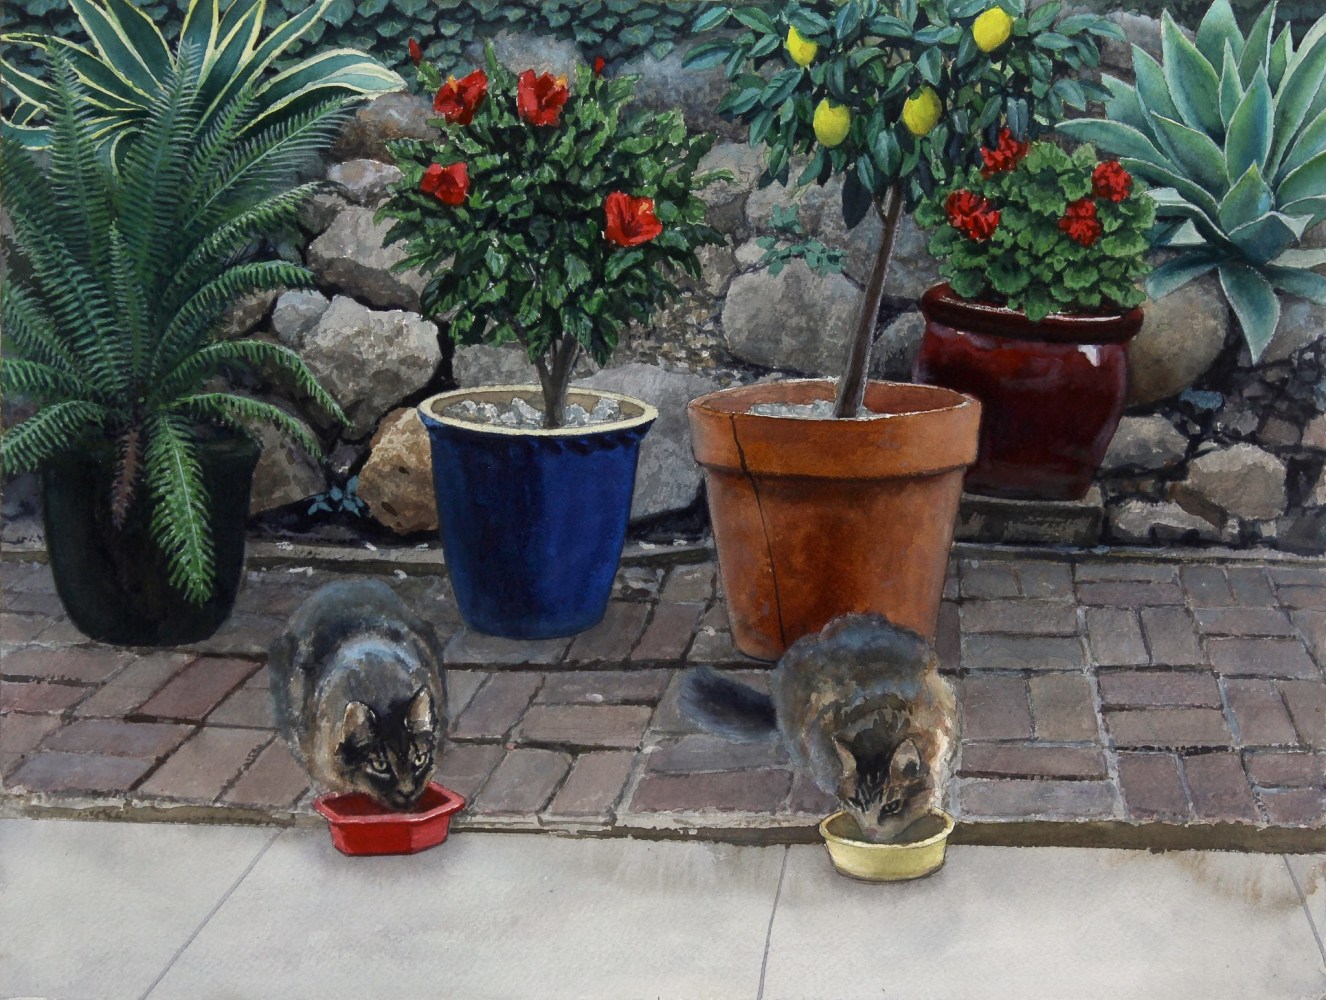 Tim Gardner

Two Cats Eating Breakfast

2020

Watercolor on paper

12 1/8 x 16 1/8 inches (30.8 x 41 cm)

TG 590

INQUIRE